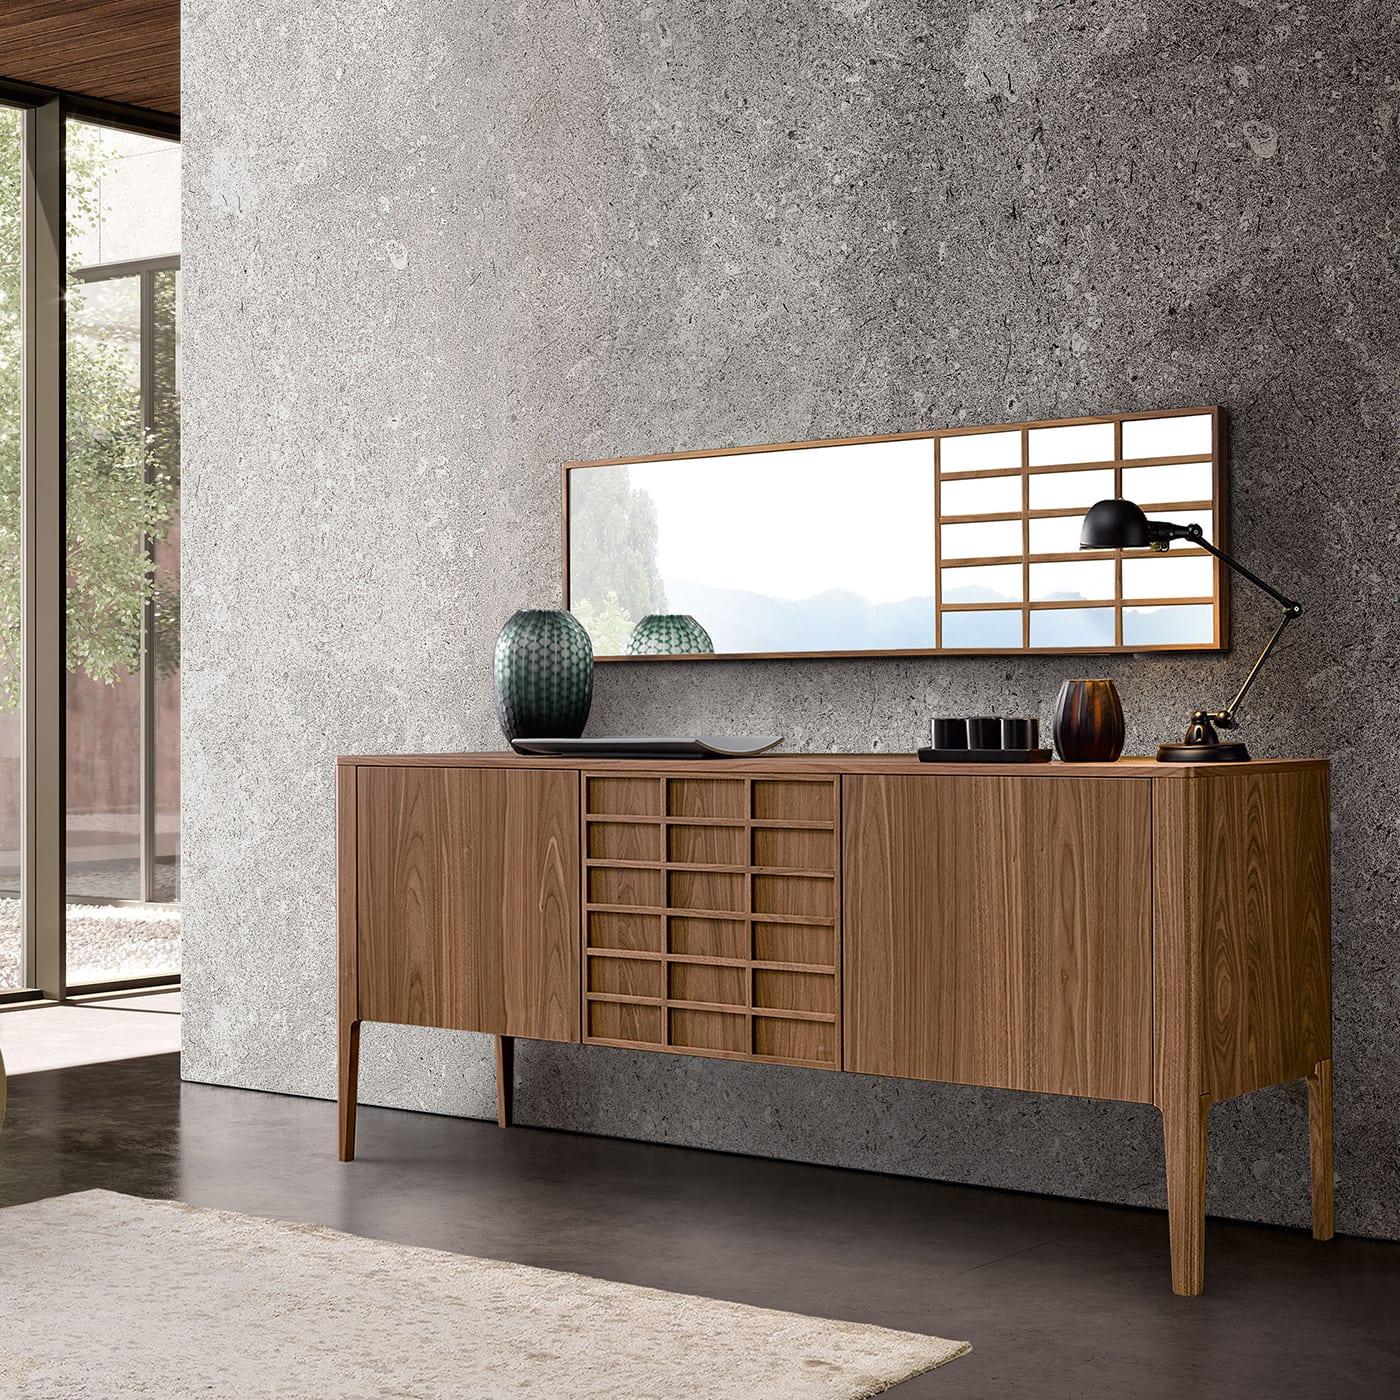 This sideboard features 3 wooden doors and 3 glass shelves with integrated wooden handles and push pull mechanism. It is curated with Havana finish.